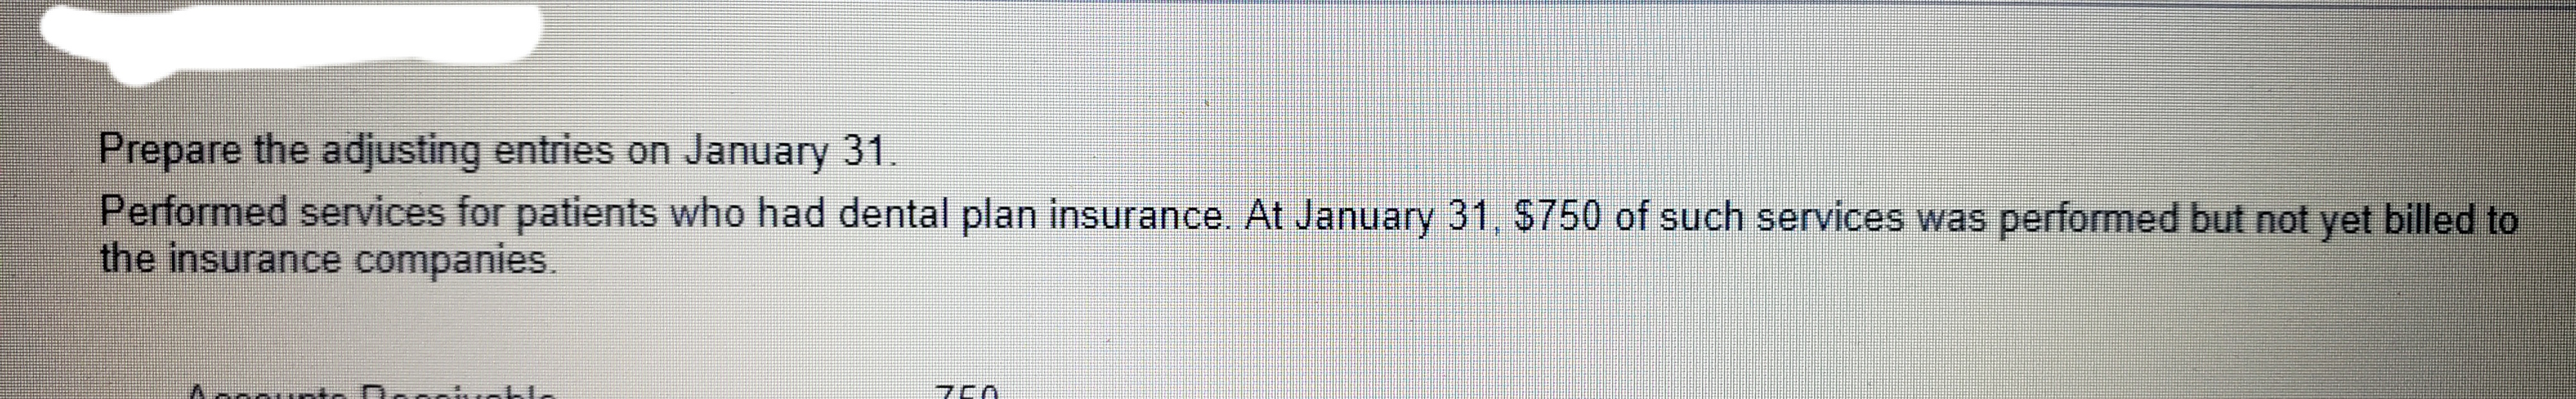 Prepare the adjusting entries on January 31.
Performed services for patients who had dental plan insurance. At January 31, S750 of such services was performed but not yet billed to
the insurance companies.
